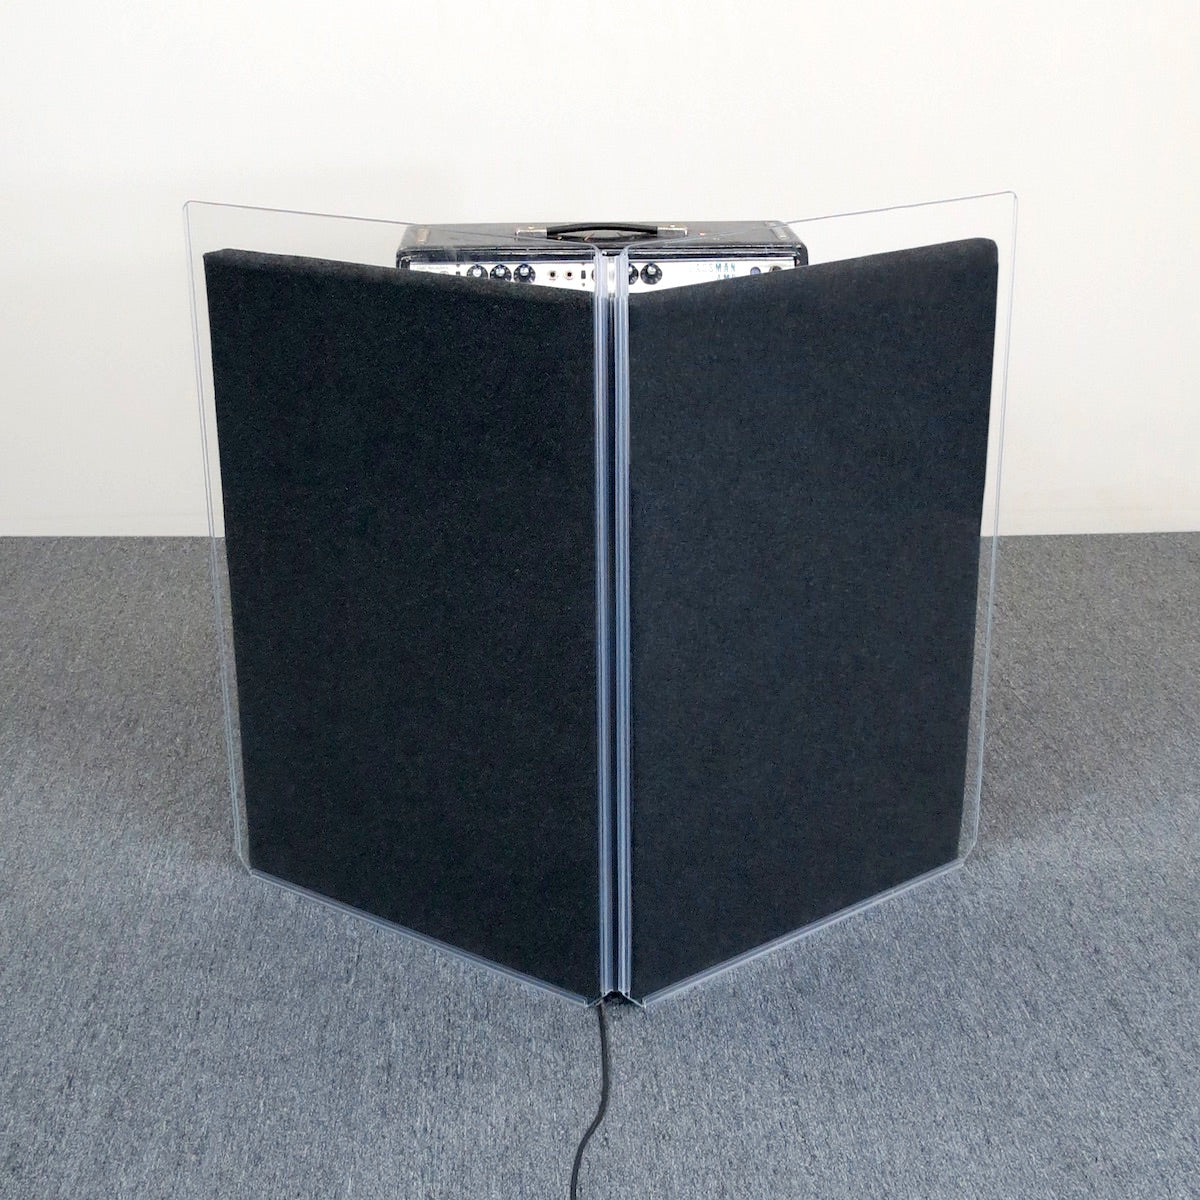 ClearSonic GP40 - GoboPac 40 - Studio Sound Isolation System, shown with amp